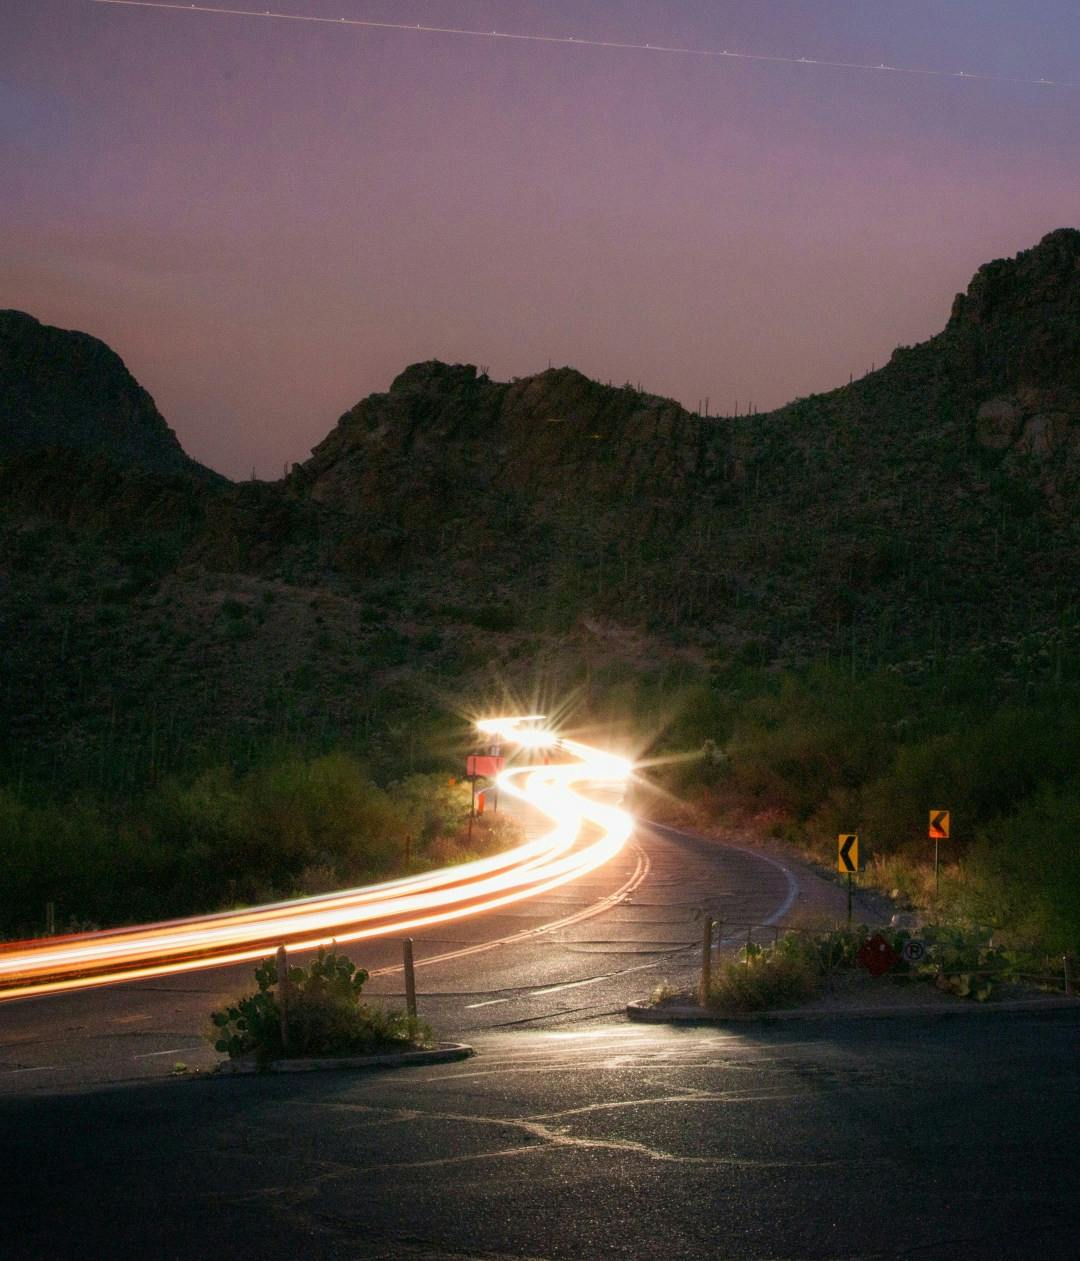 A timelapse image of a highway in Tucson